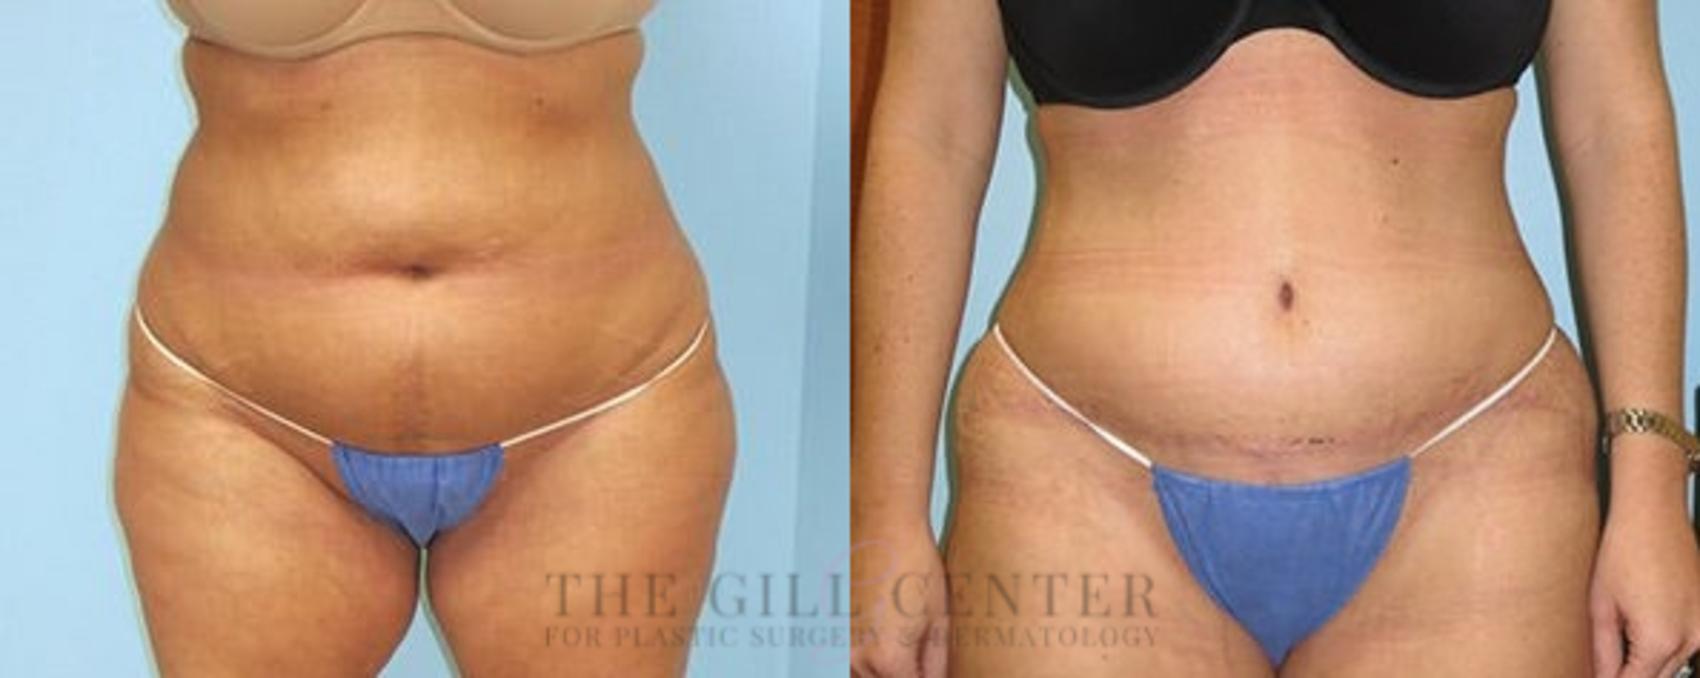 Tummy Tuck Case 243 Before & After Front | The Woodlands, TX | The Gill Center for Plastic Surgery and Dermatology